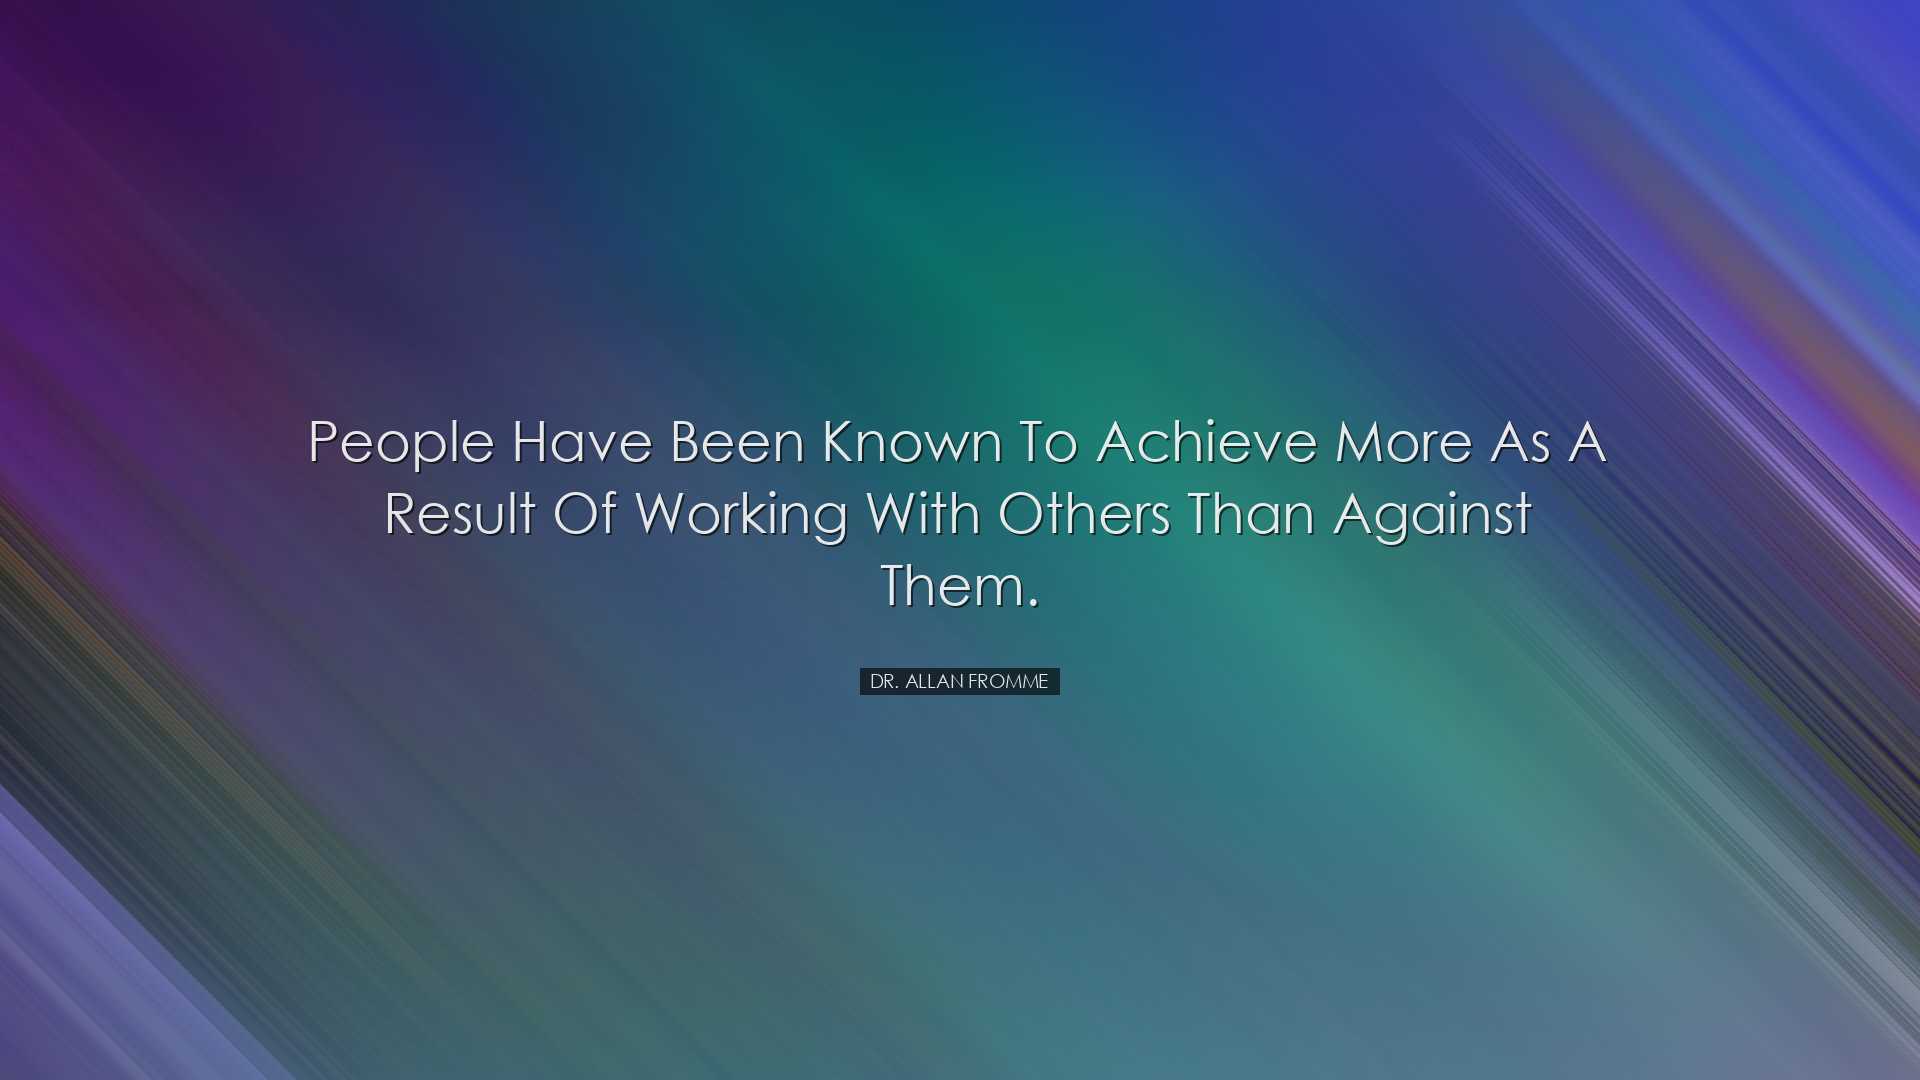 People have been known to achieve more as a result of working with